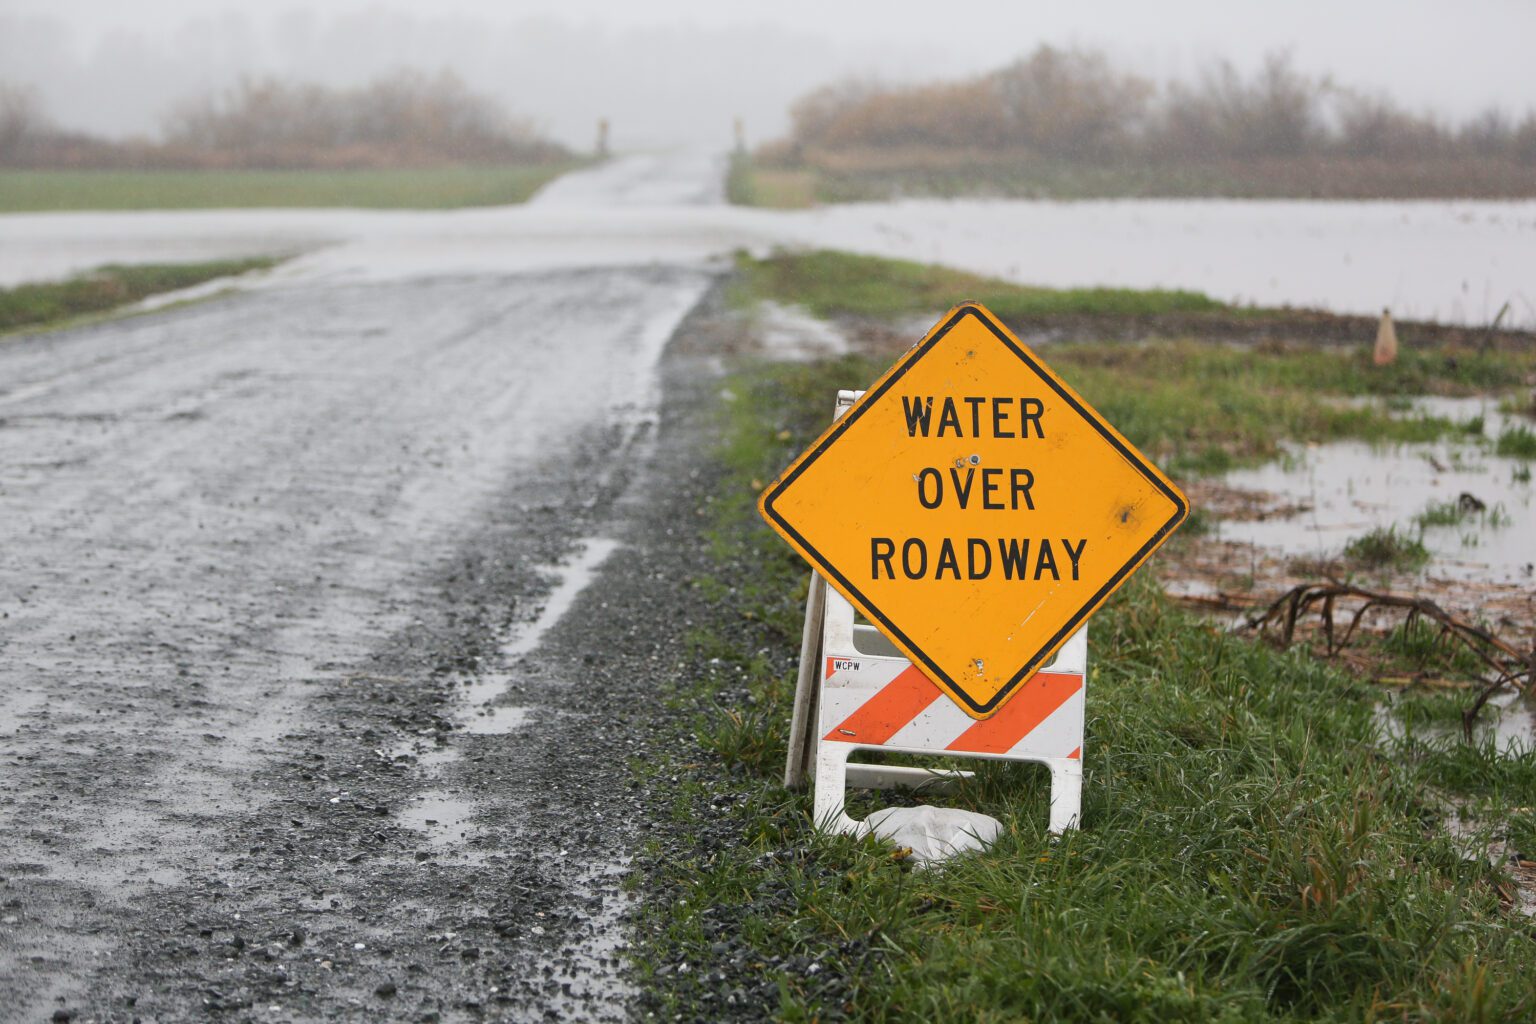 Floodwaters cover a road in Lynden as a yellow sign is placed in the grass warning the drivers of water over roadway.